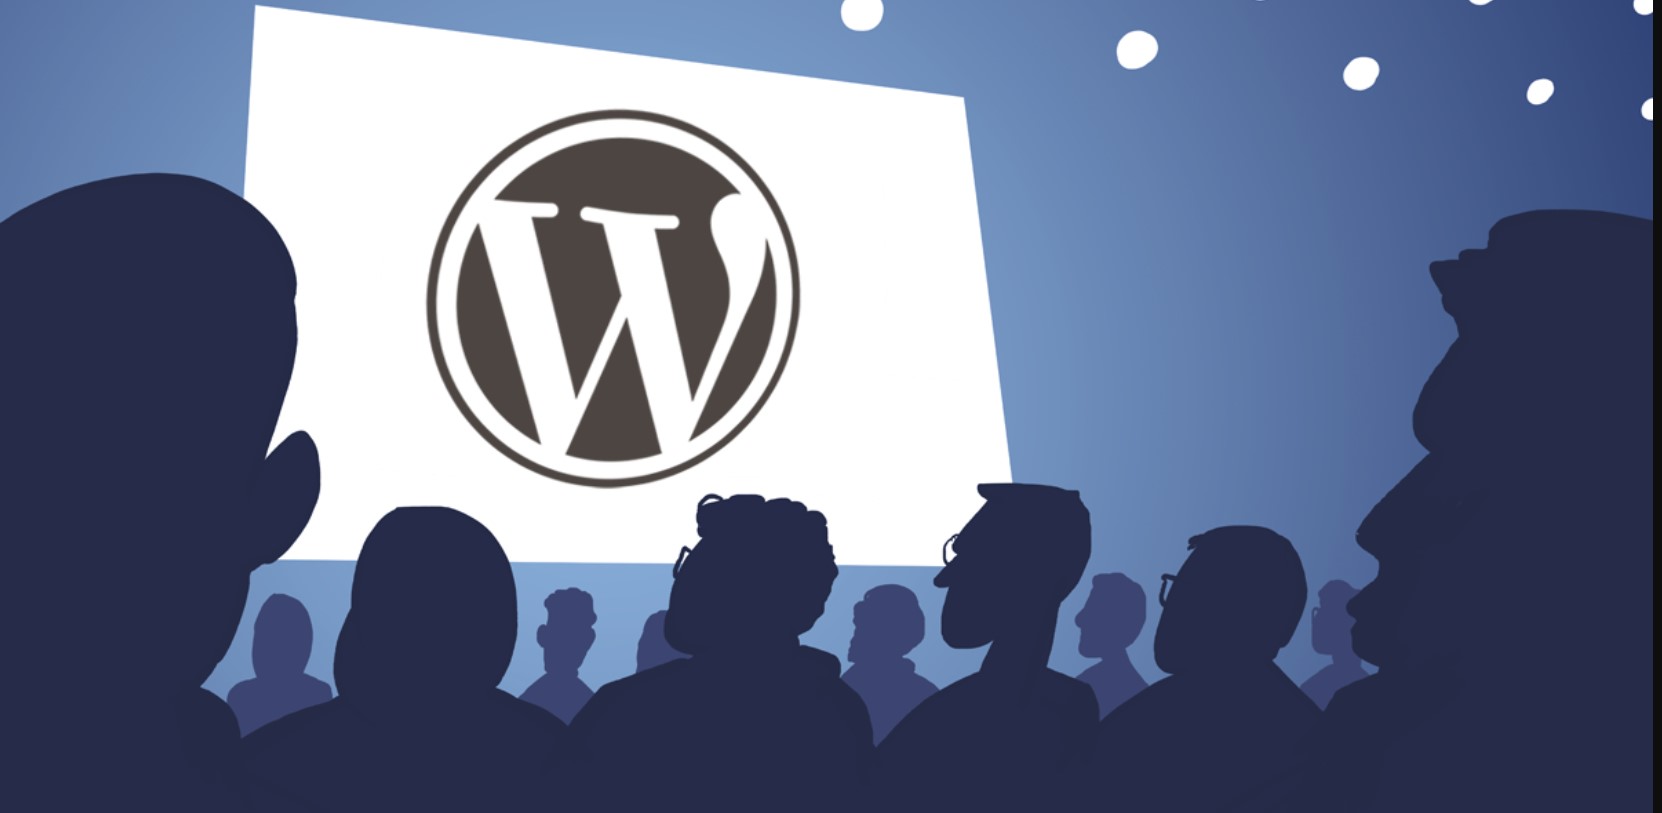 From Concept to Creation: Building a Professional Website Using WordPress